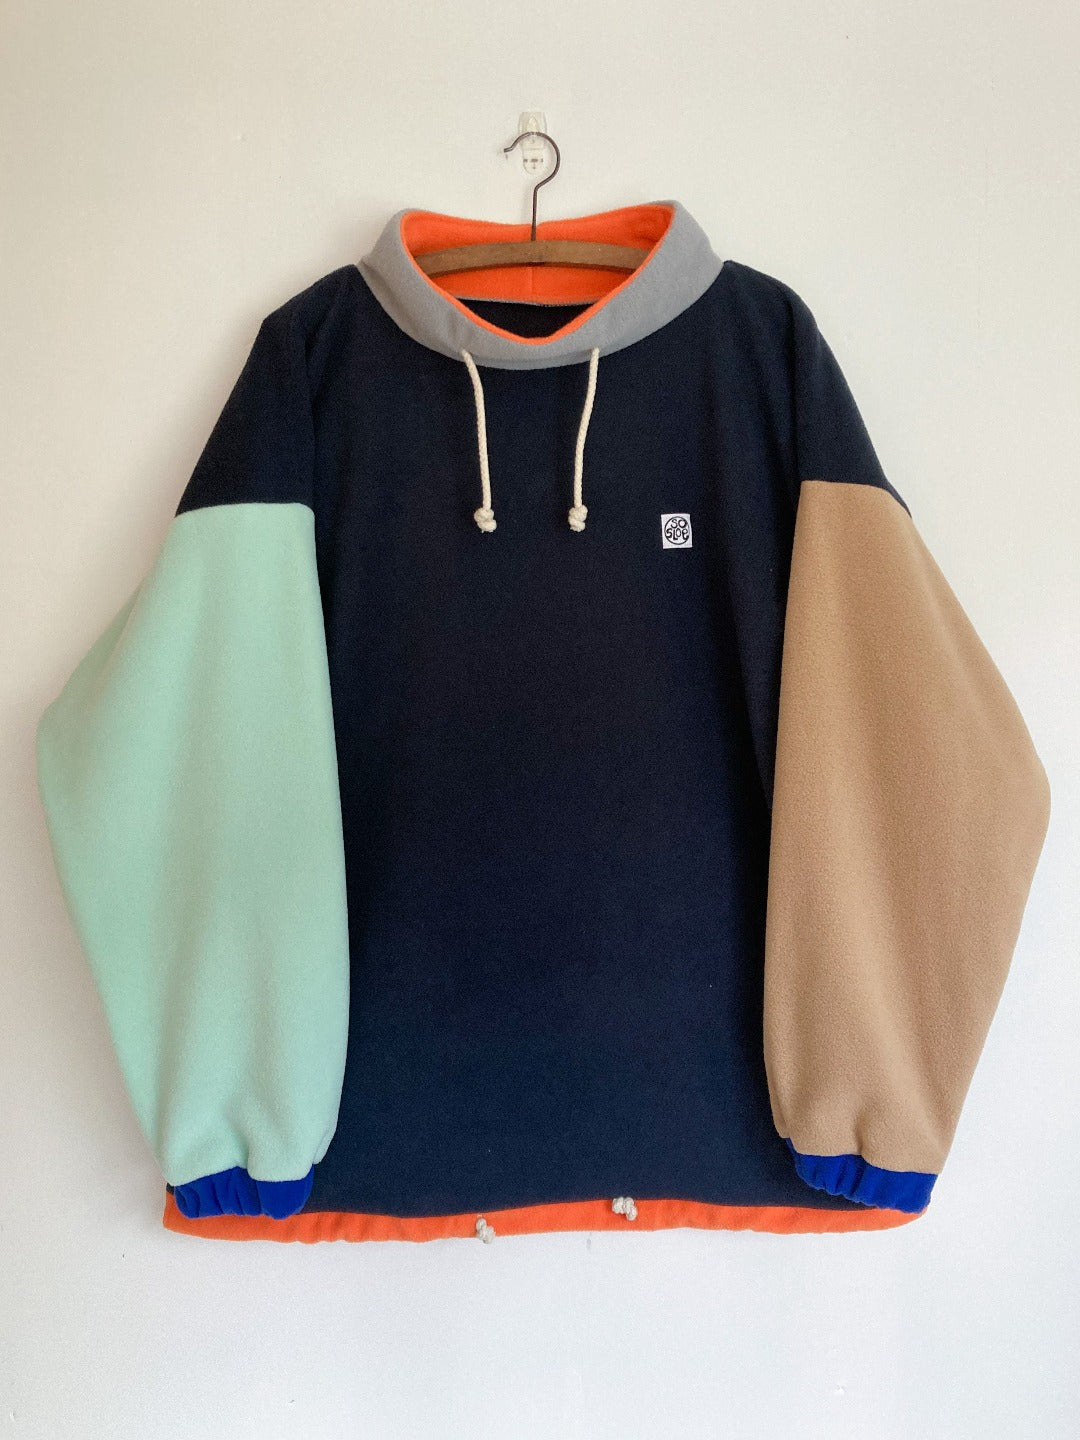 Navy fleece with contrasting sleeves.